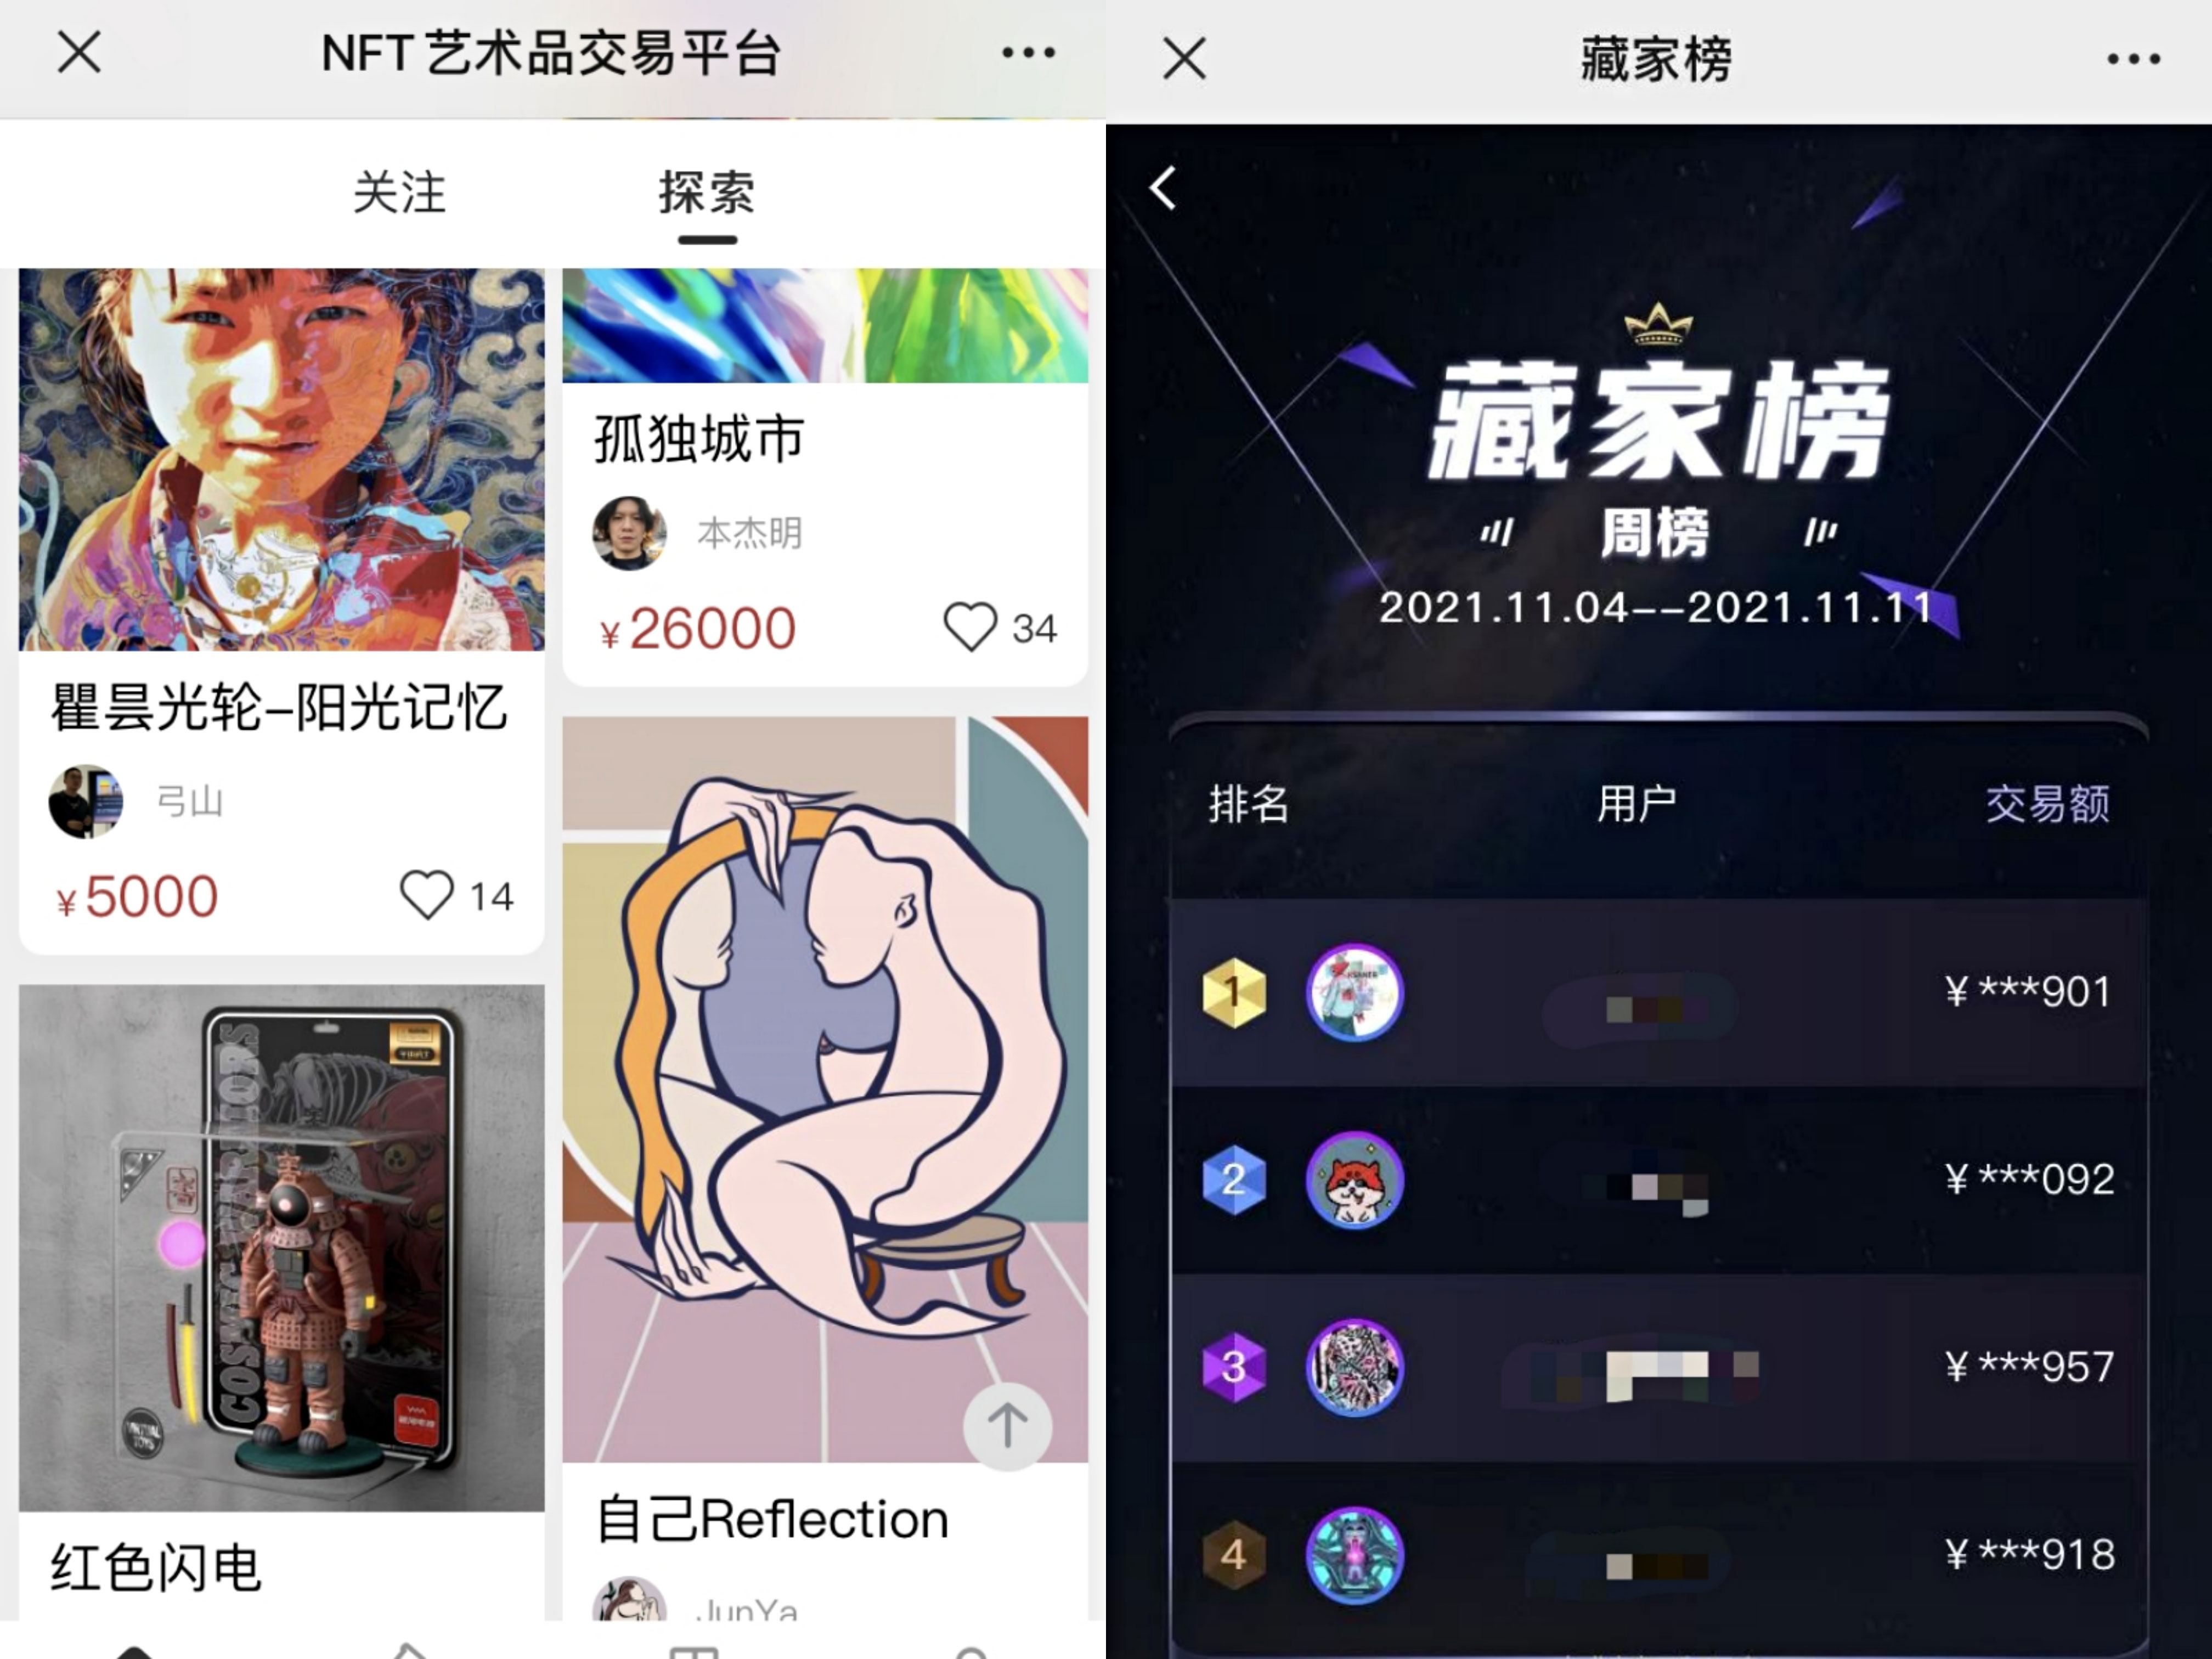 some NFT artwork  The trading platform’s product page and collector list rankings.  Drawing Shen Jiaping